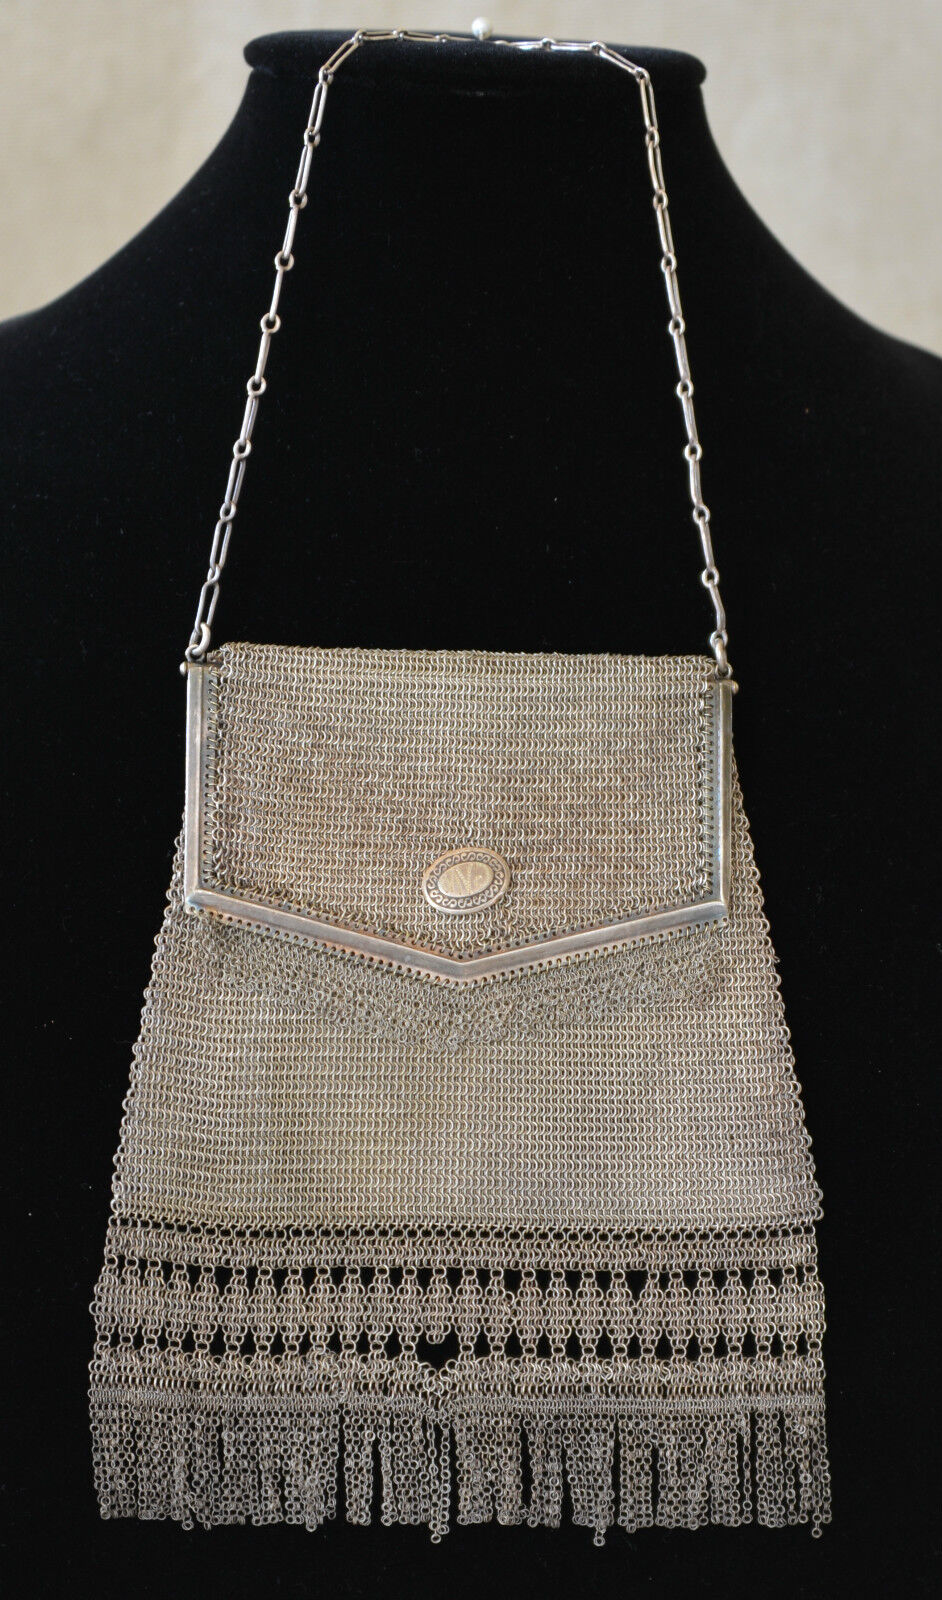 Antique 1920s Whiting and Davis Mesh Bag Princess Mary Silver Metal Fringe Purse